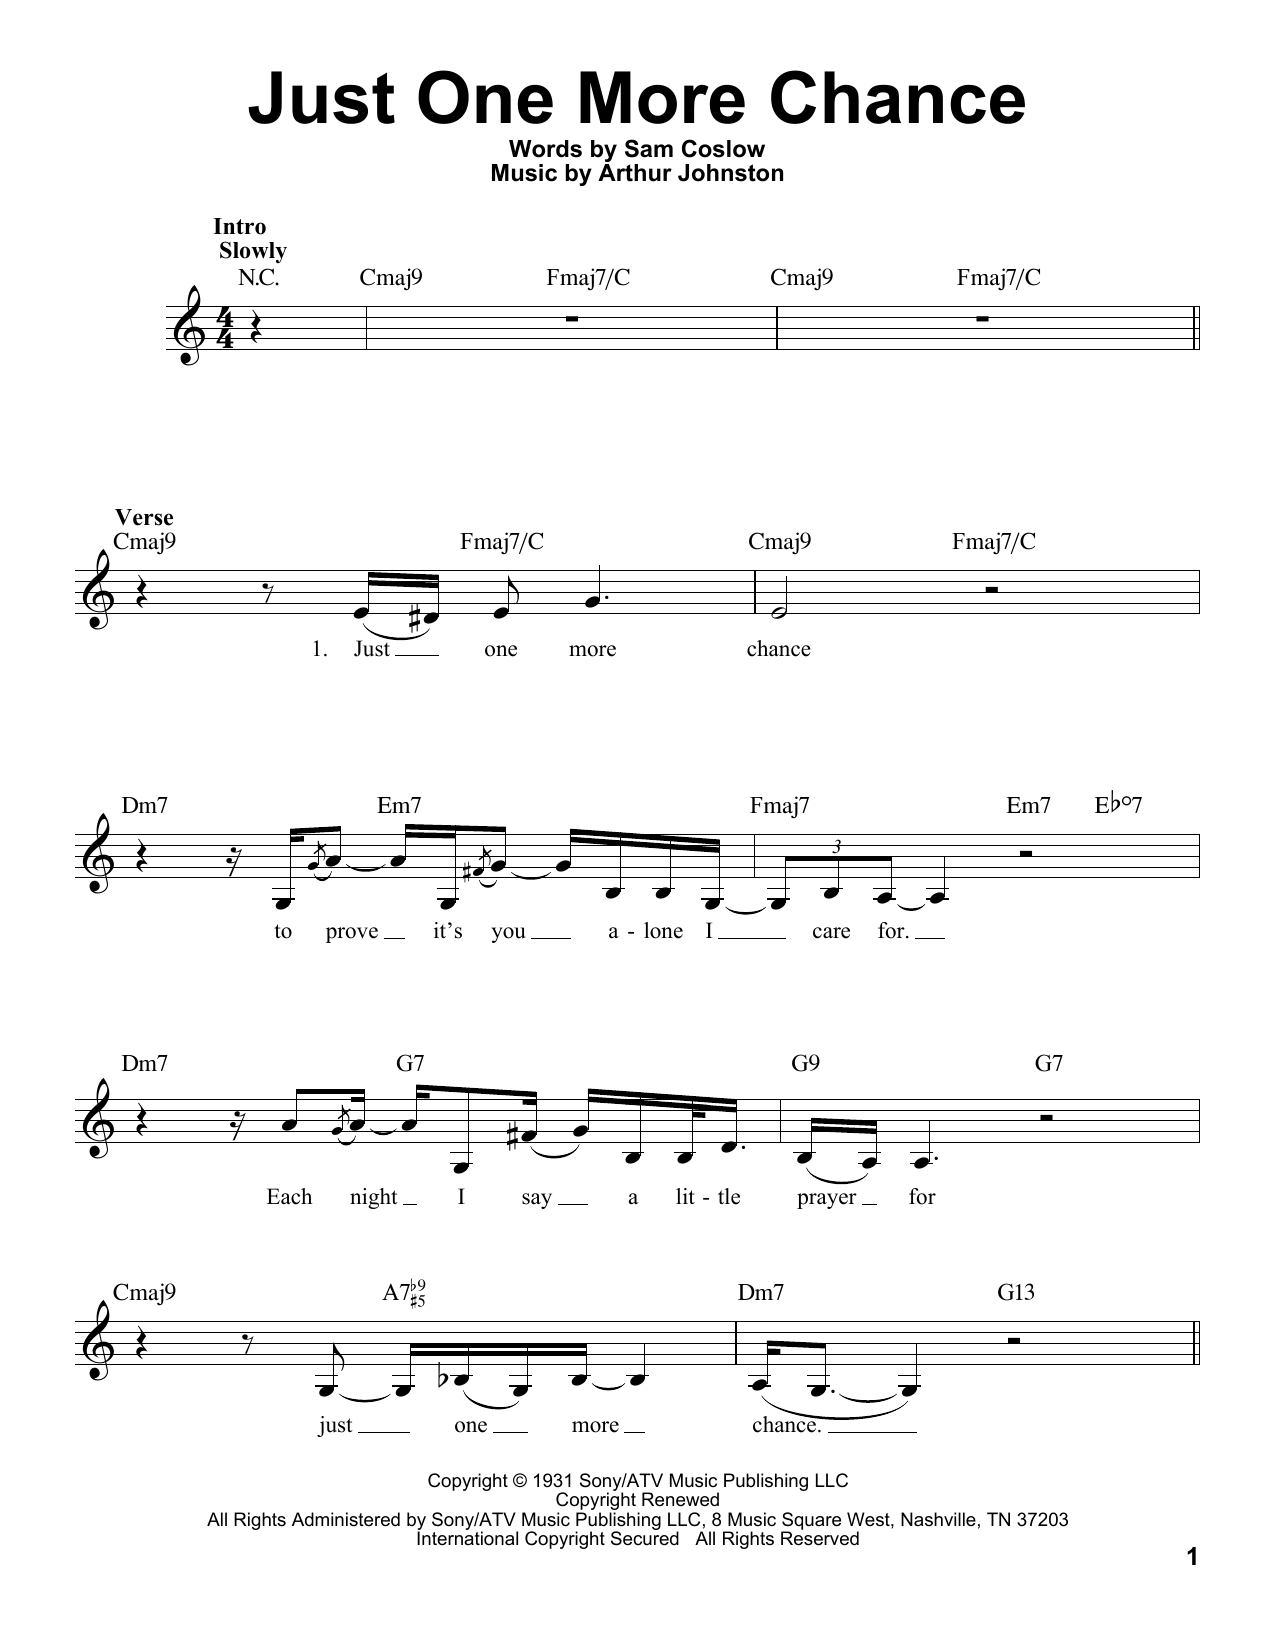 Billie Holiday Just One More Chance sheet music notes and chords. Download Printable PDF.